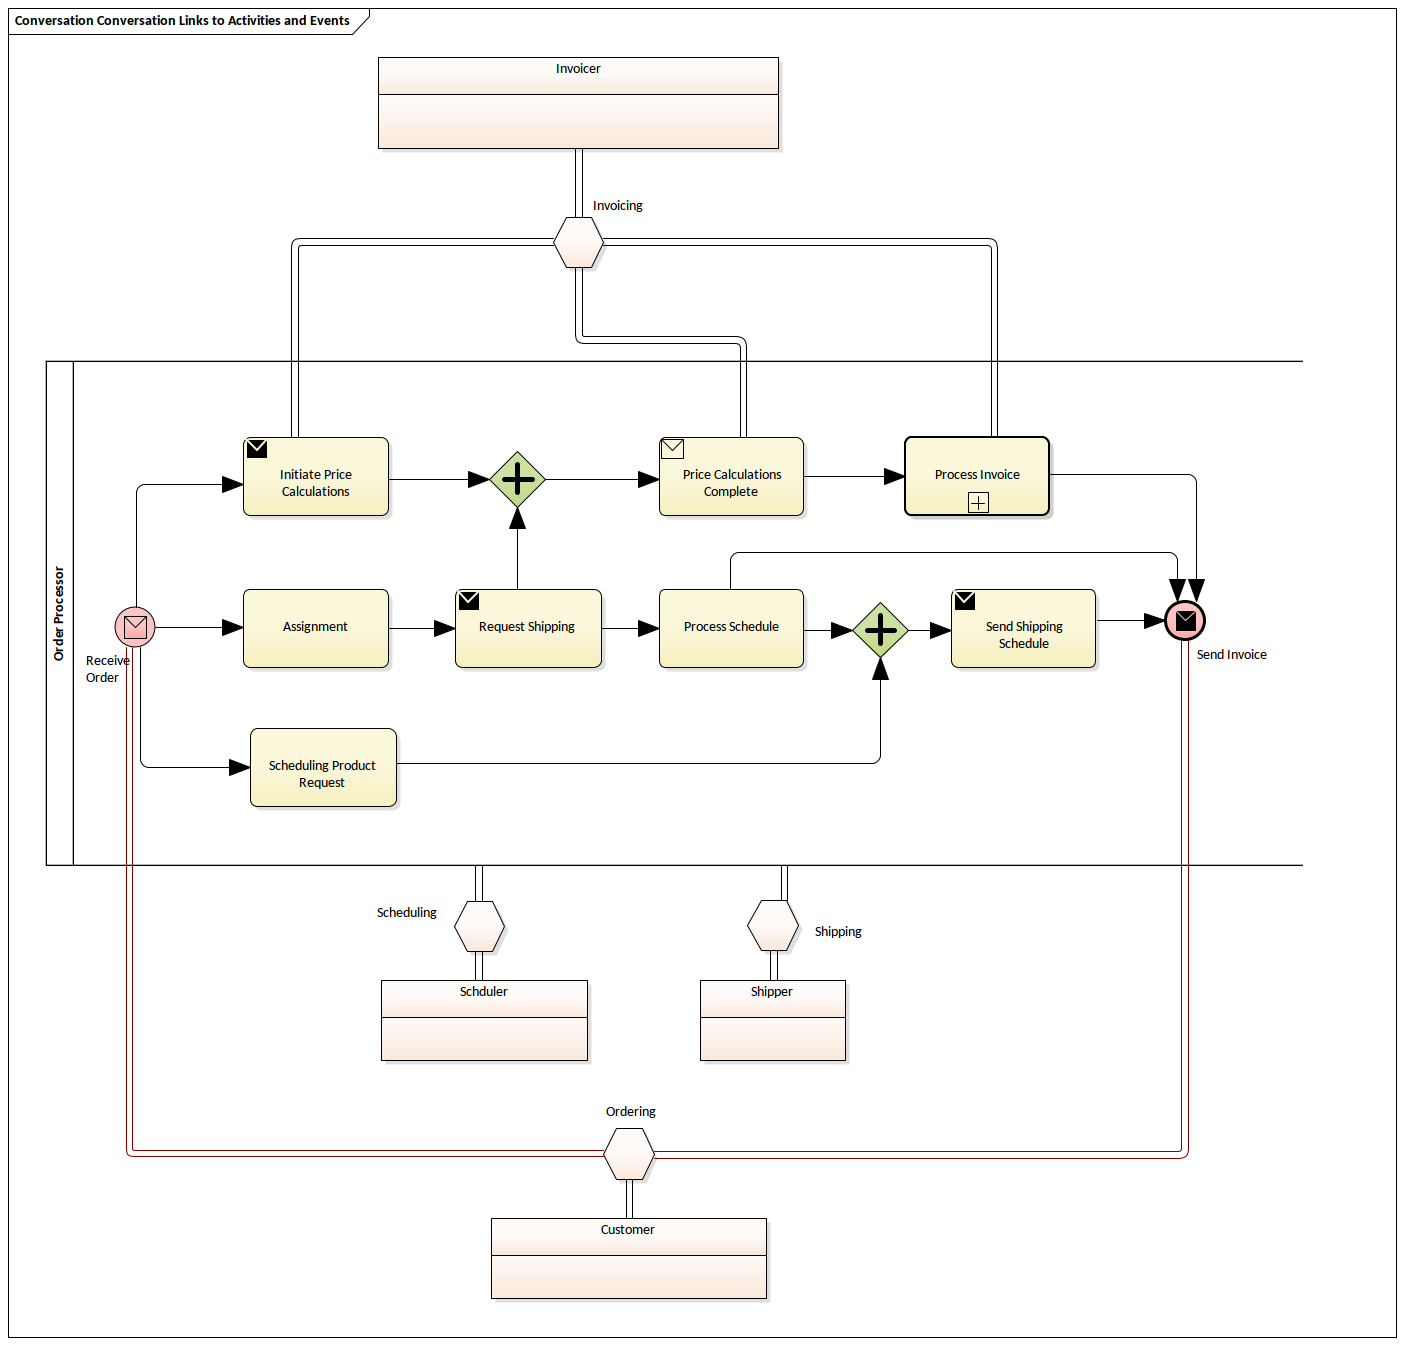 BPMN Conversation Diagram - Links to Activities and Events